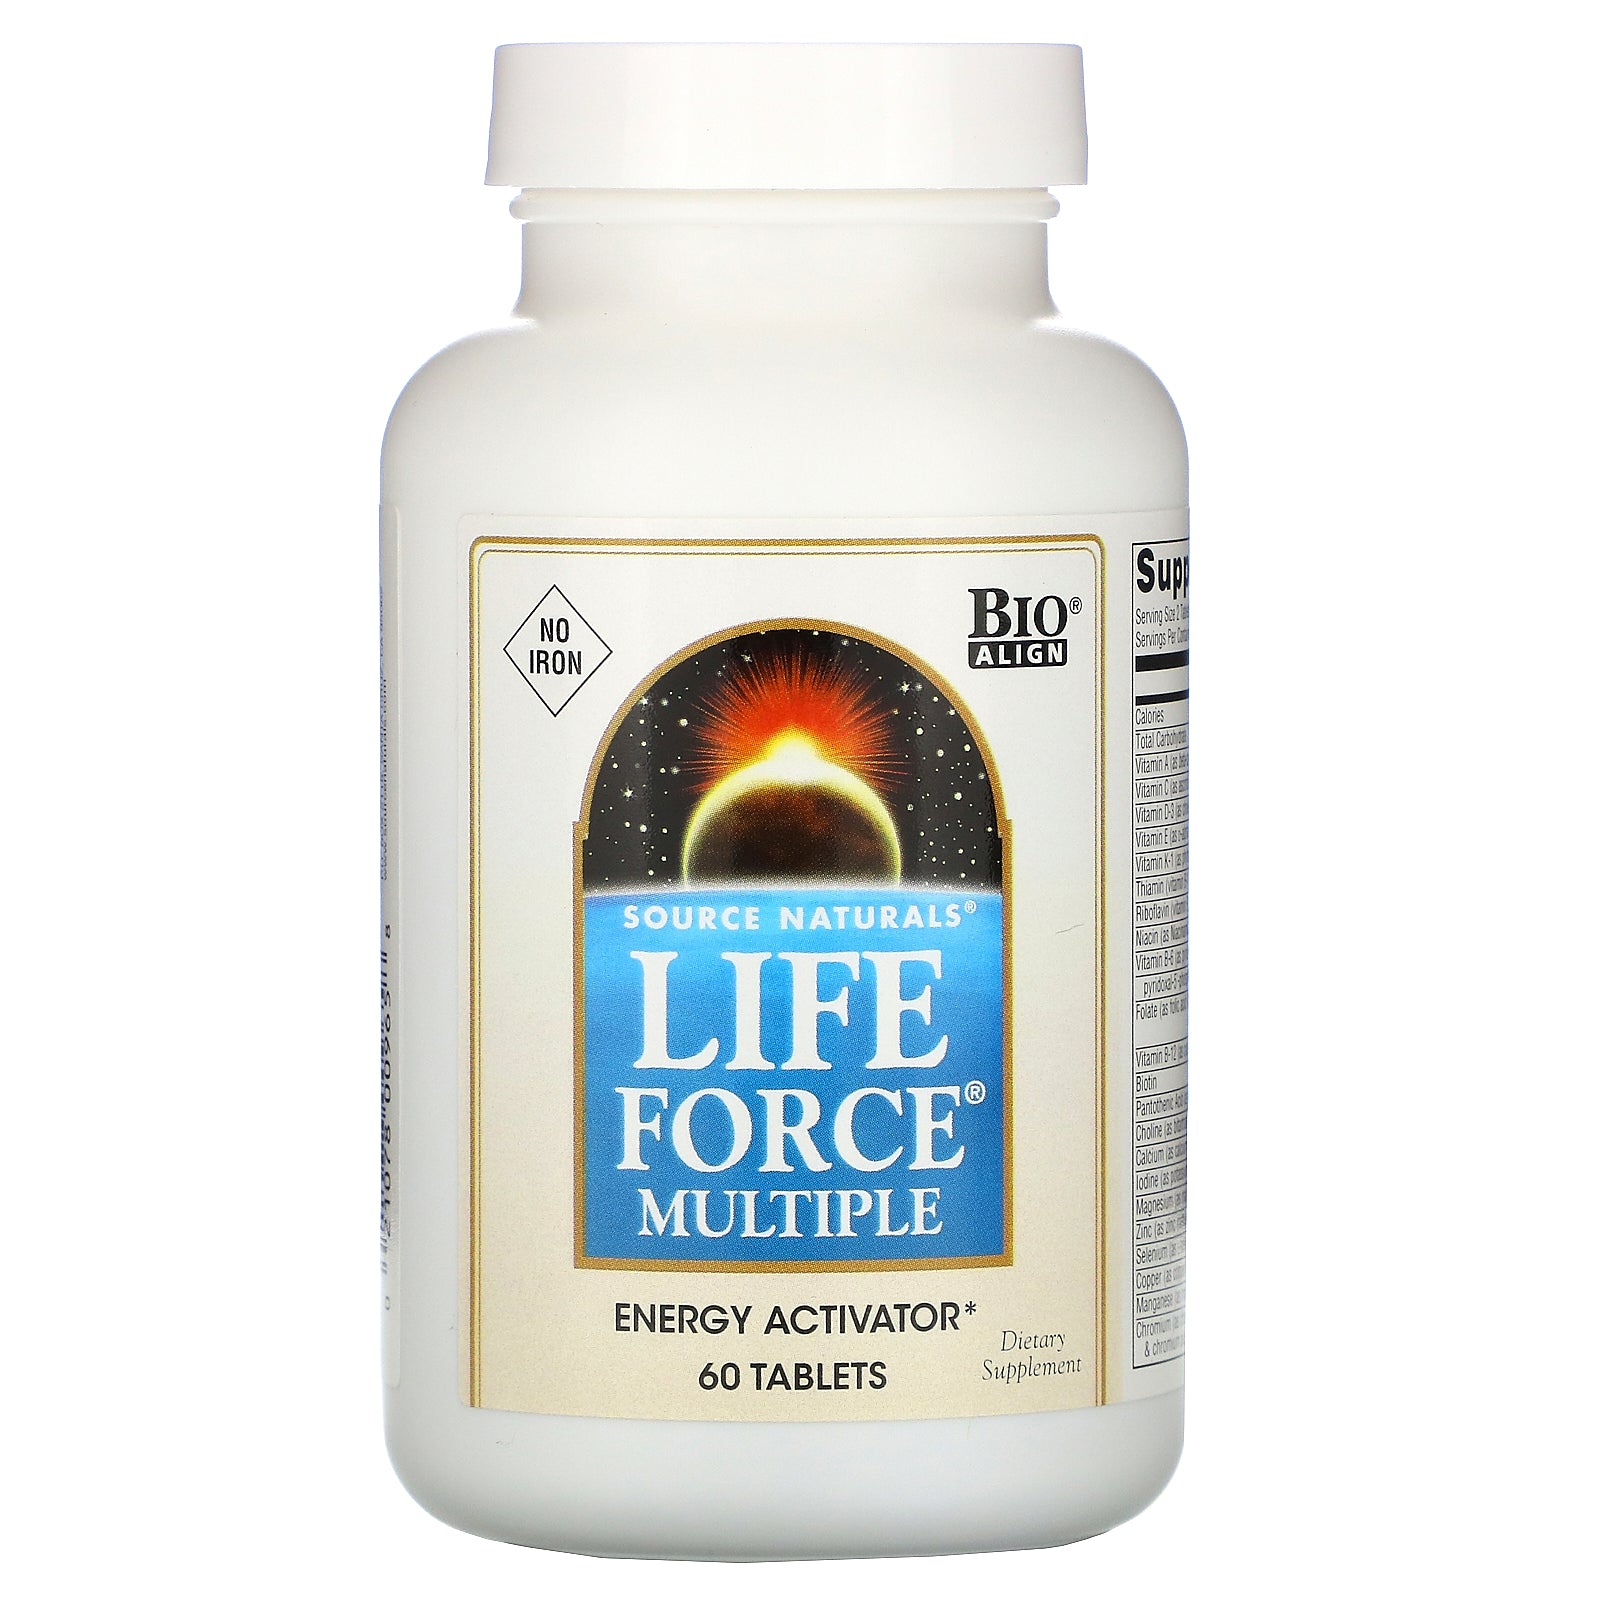 Source Naturals, Life Force Multiple, No Iron, 60 Tablets